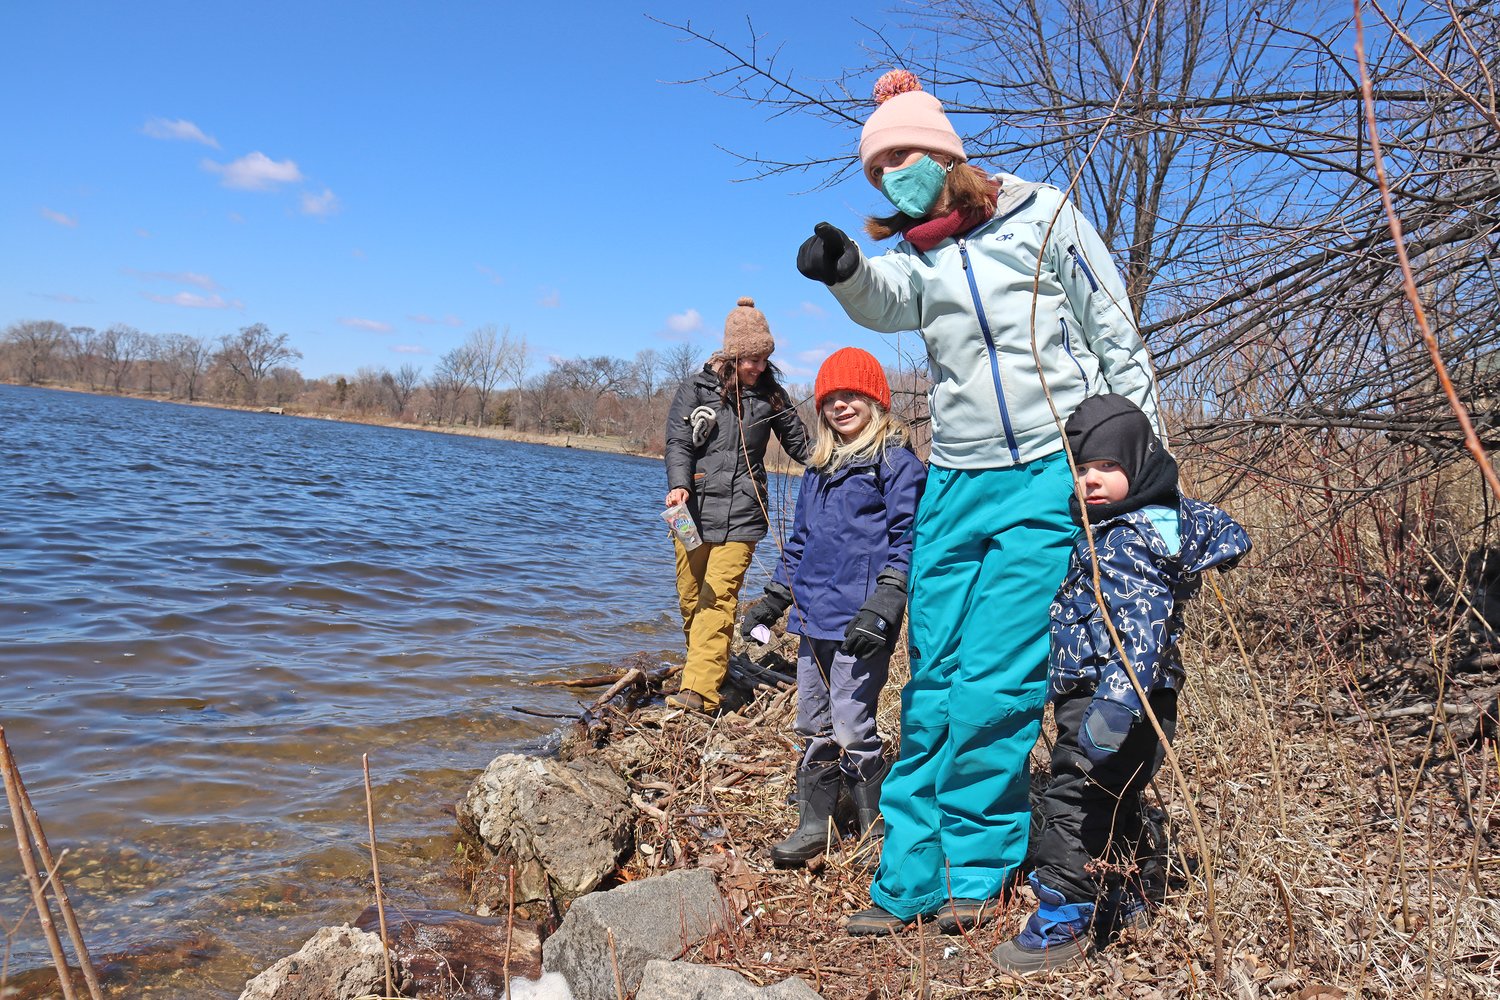 Nicole Cavender, who is Dakota, with Weston, 6, and Becket, 2.5 years, along with Ali Mailander and Hap (not shown) clean up trash along Lake Hiawatha on April 16, 2022. (Photo by Tesha M. Christensen)